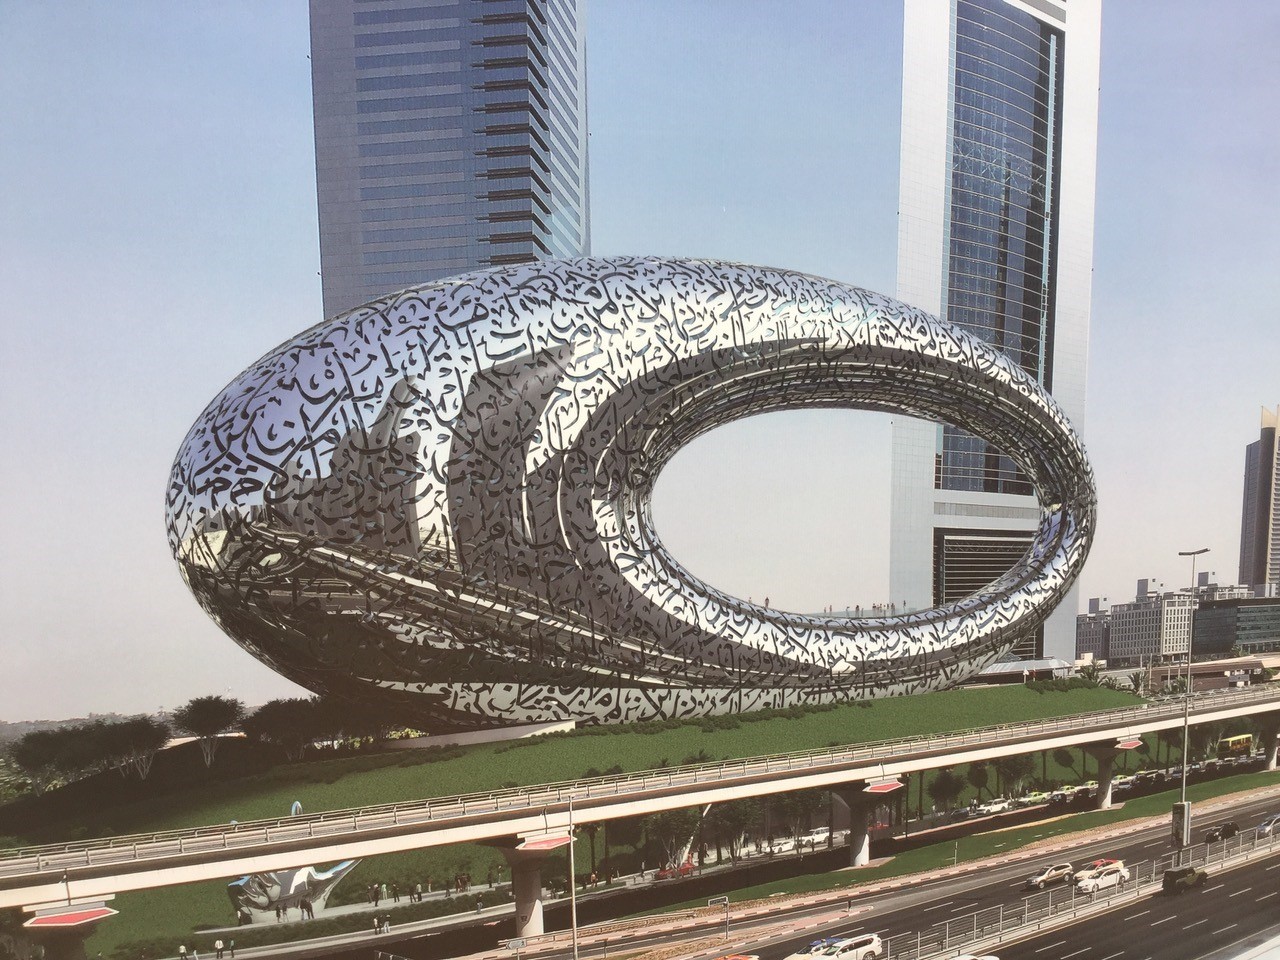 Mikes company is currently working on the Museum of the Future in Dubai